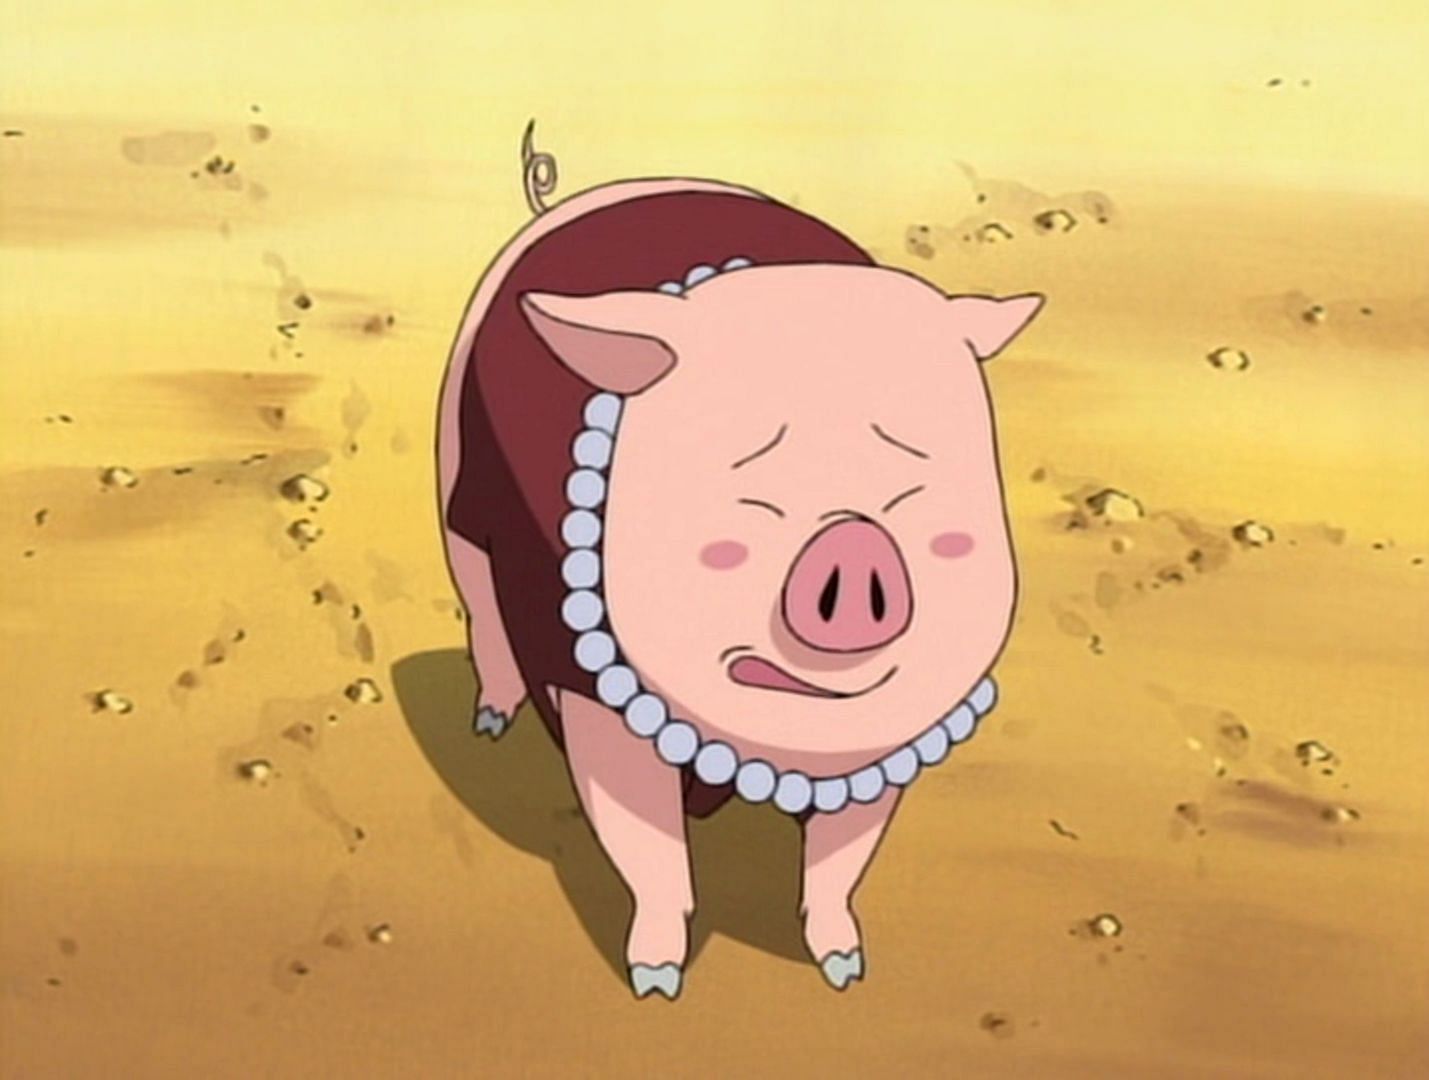 Tonton as she appears in the series (Image via Pierrot)